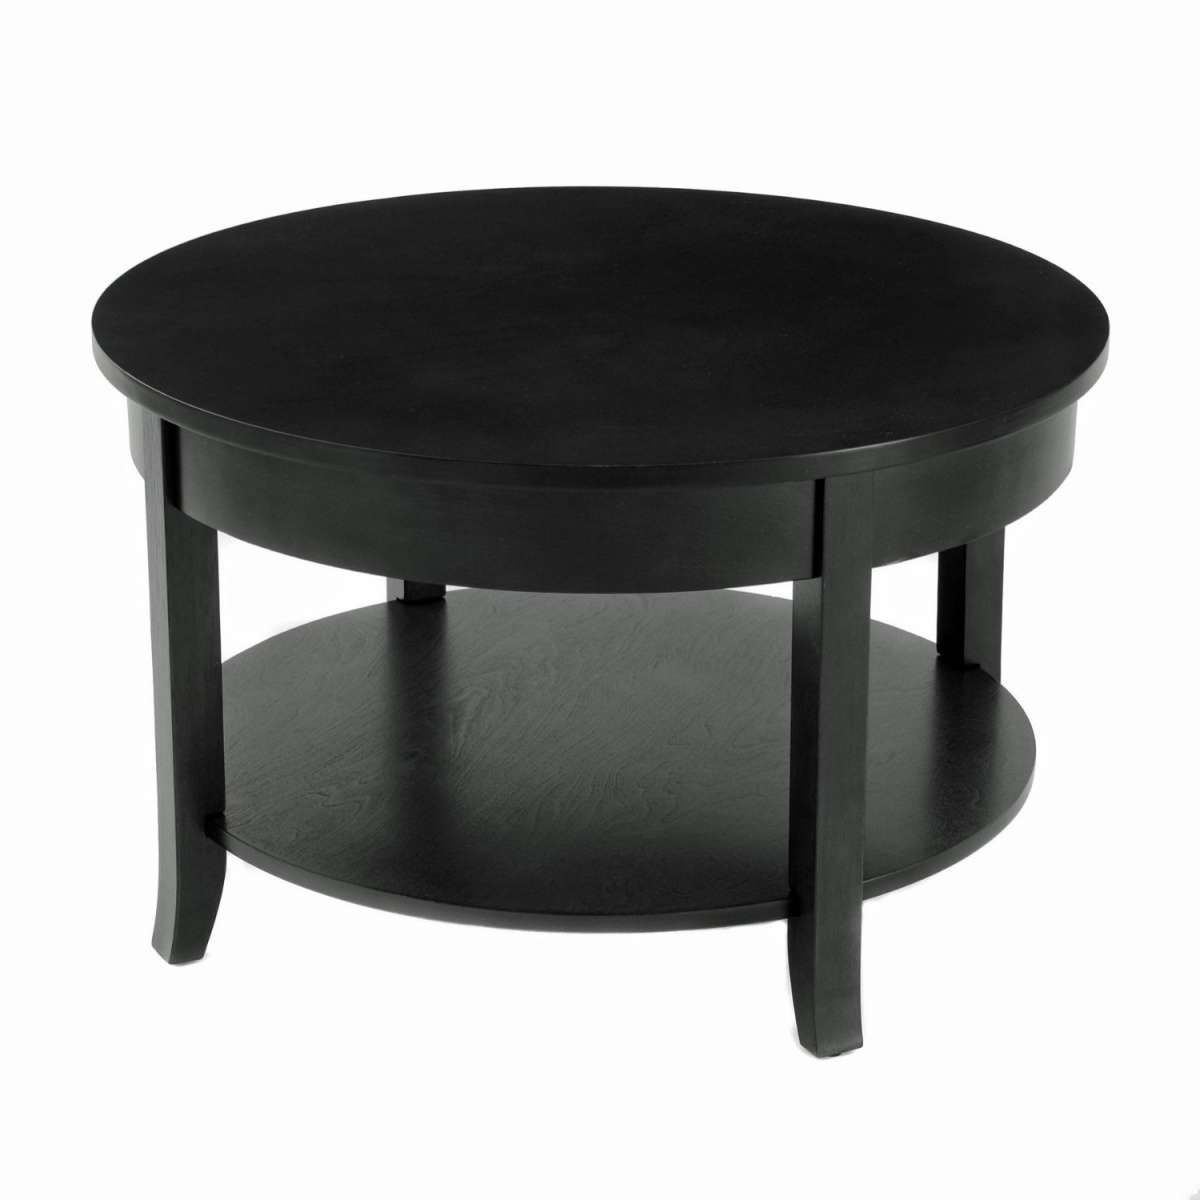 Most Popular Small Circle Coffee Tables Throughout Coffee Table: Small Round Coffee Table Round Wood Coffee Table (View 3 of 20)